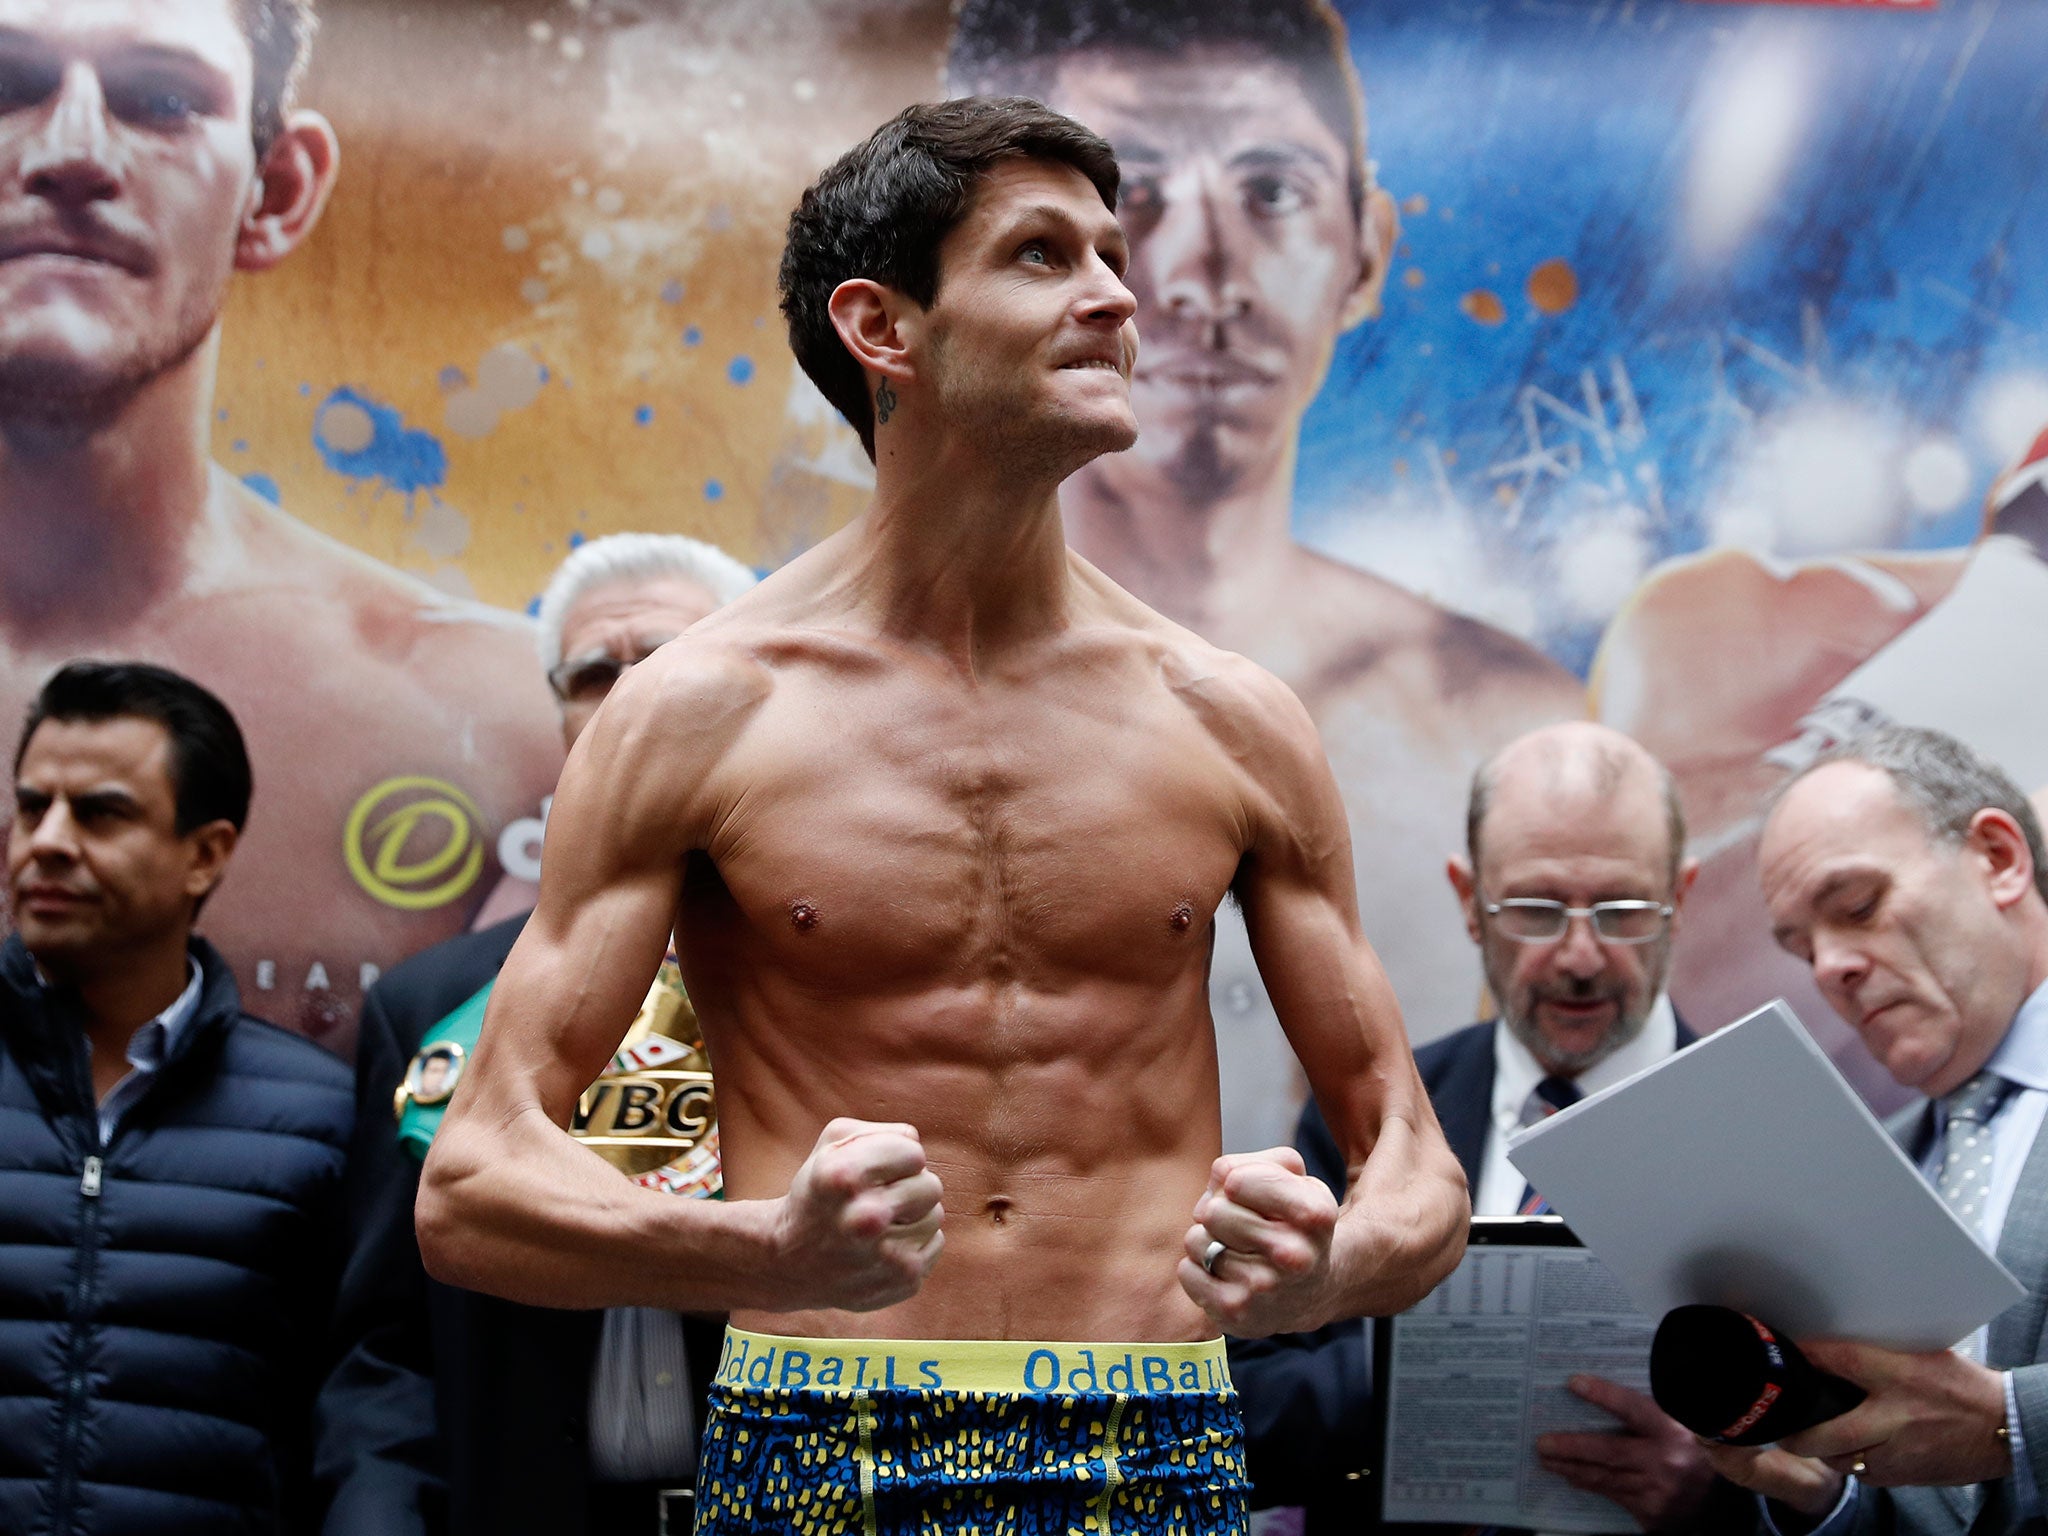 McDonnell during the weigh-in